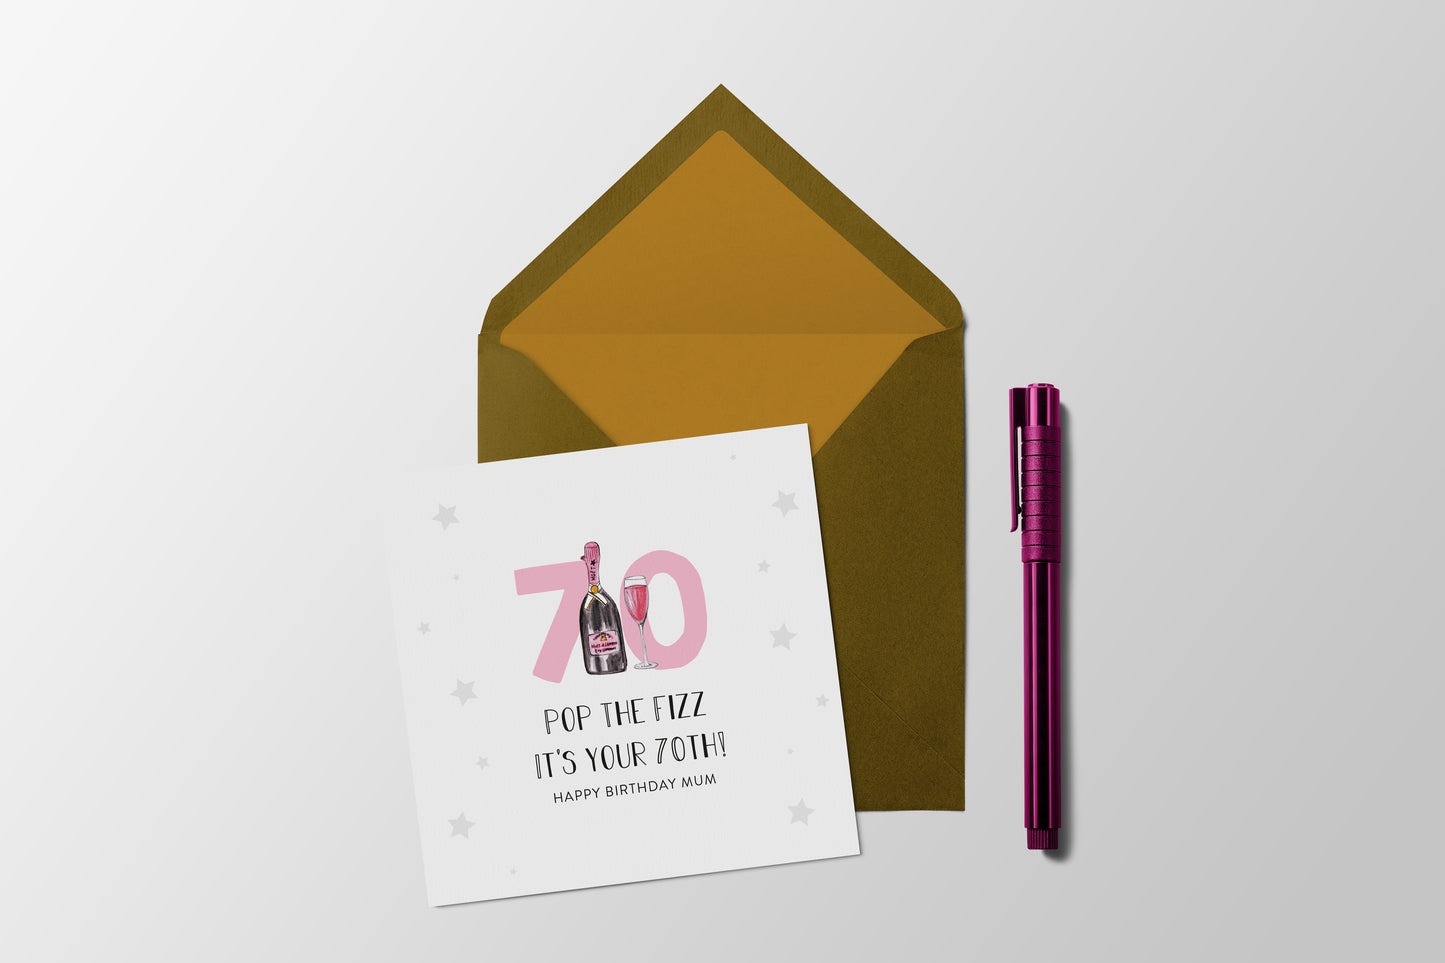 Pop the fizz it's your 70th - 70th Birthday card for Mum